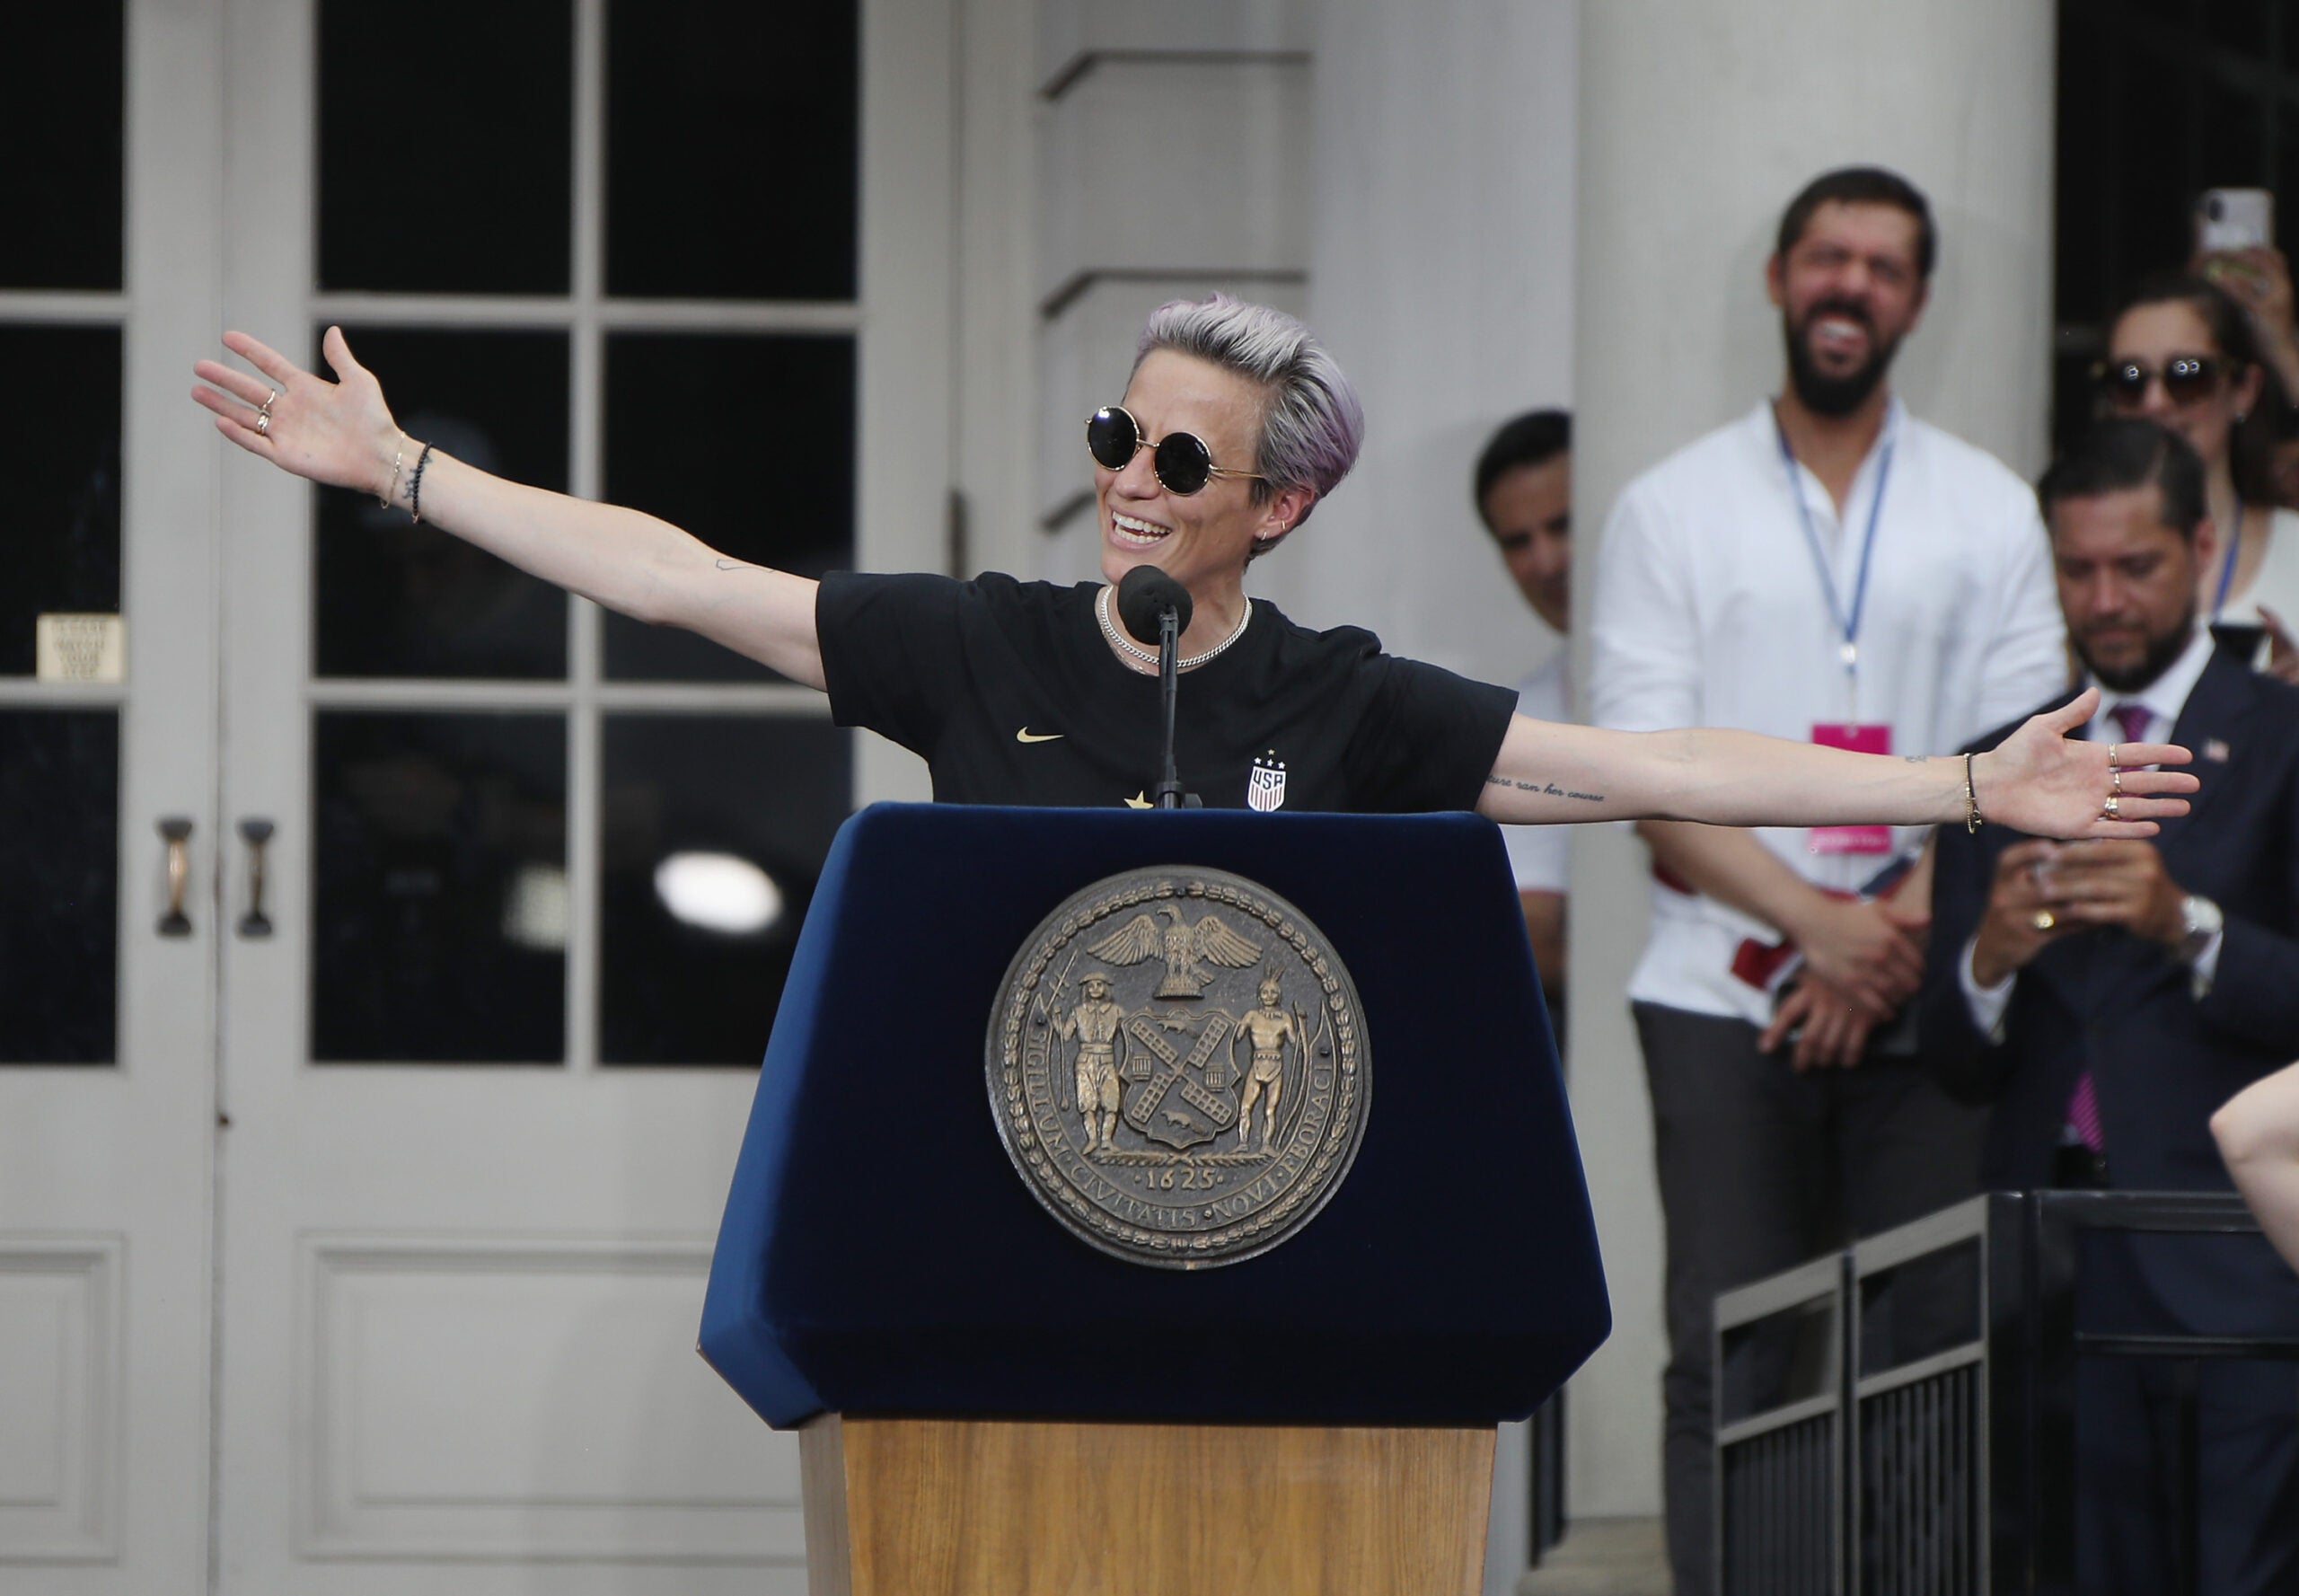 Megan Rapinoe and her teammates have politicised football in the best way possible